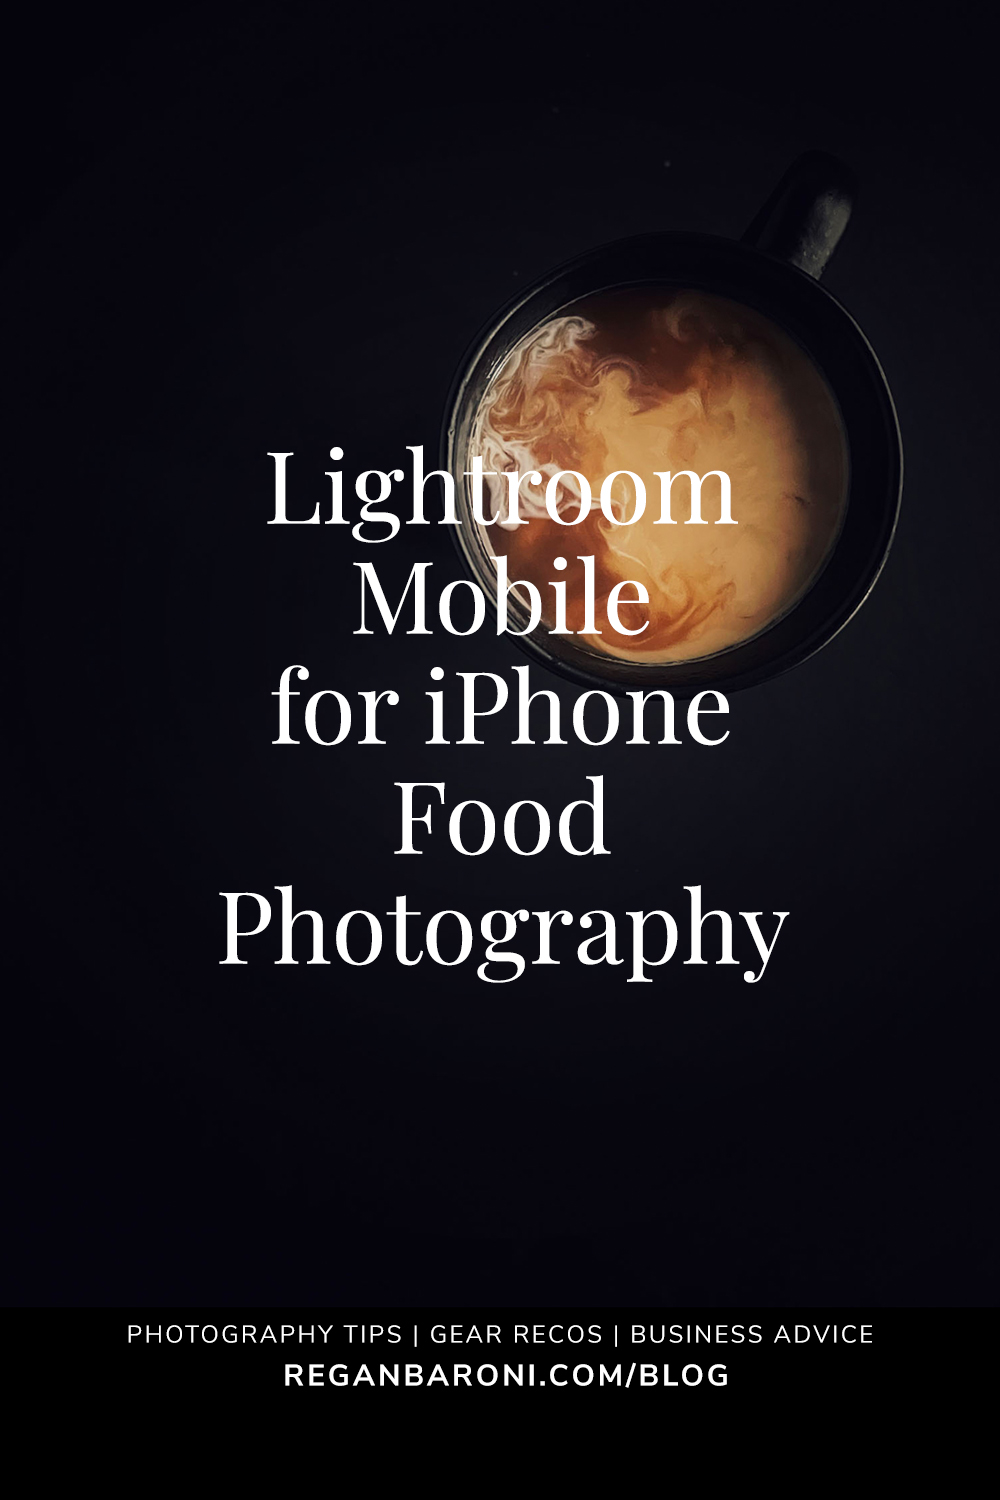 Lightroom Mobile for iPhone Food Photography